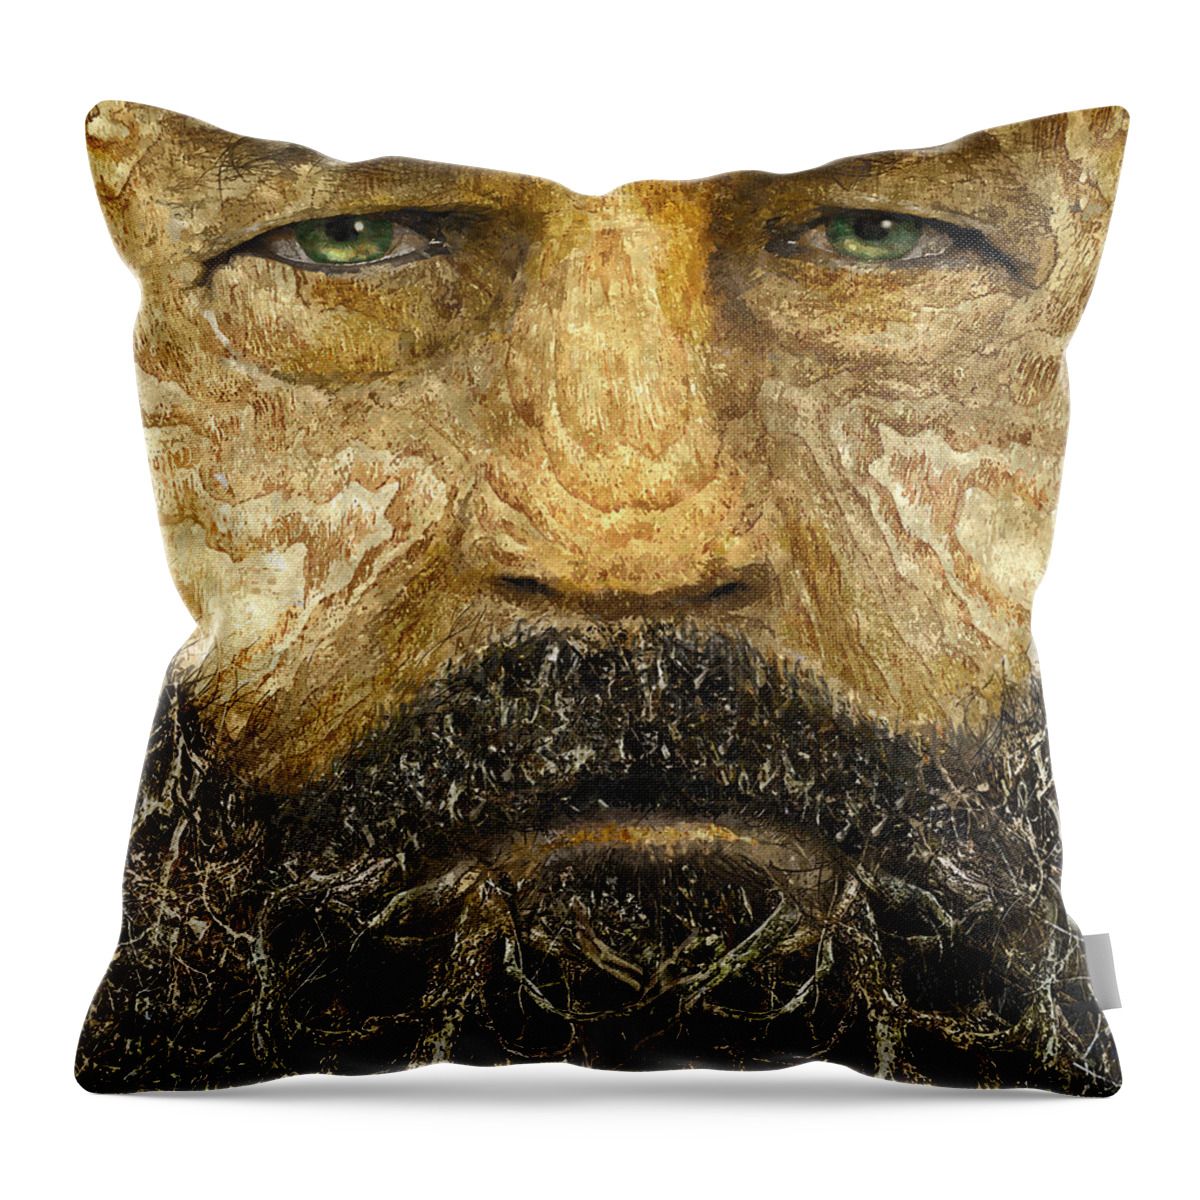 Wood Throw Pillow featuring the painting Wood Rick by Rick Mosher